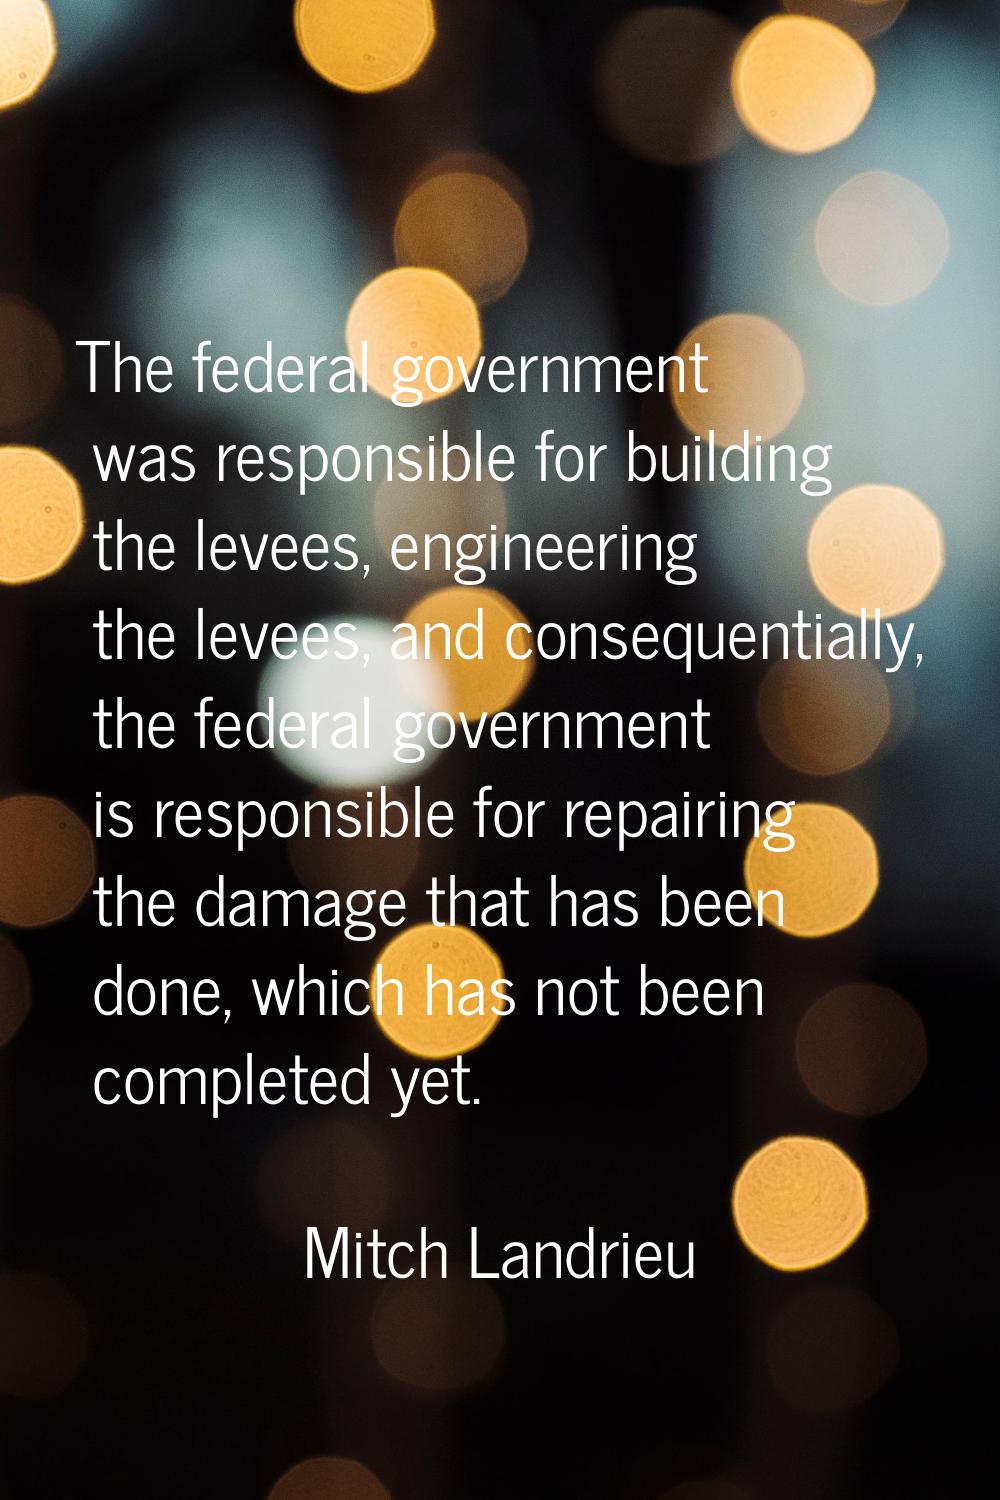 The federal government was responsible for building the levees, engineering the levees, and consequ